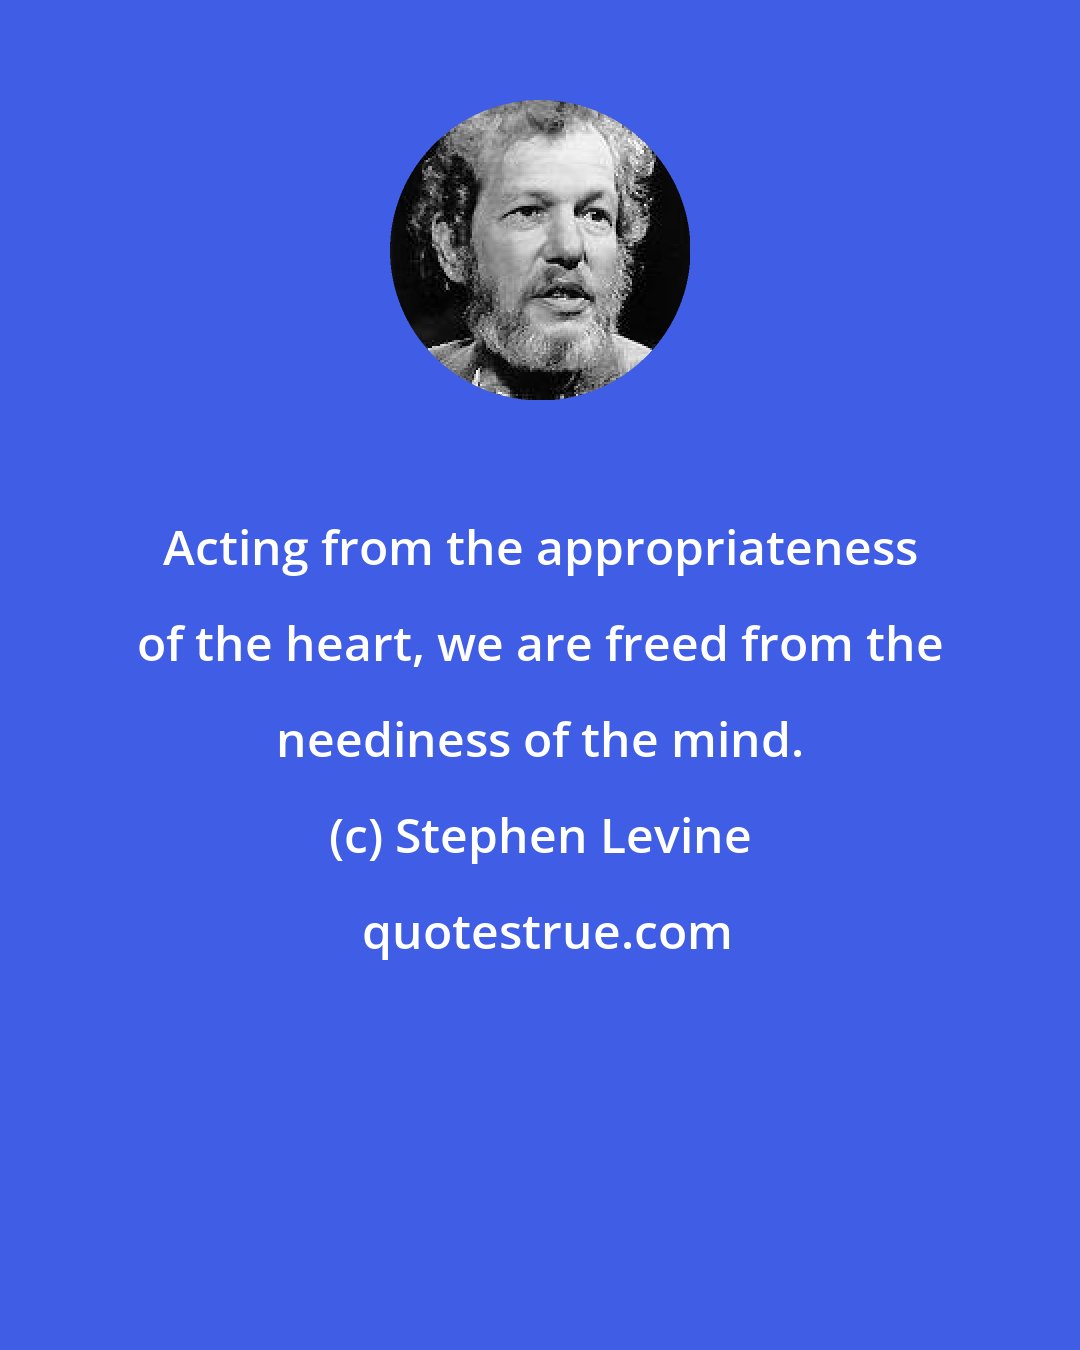 Stephen Levine: Acting from the appropriateness of the heart, we are freed from the neediness of the mind.